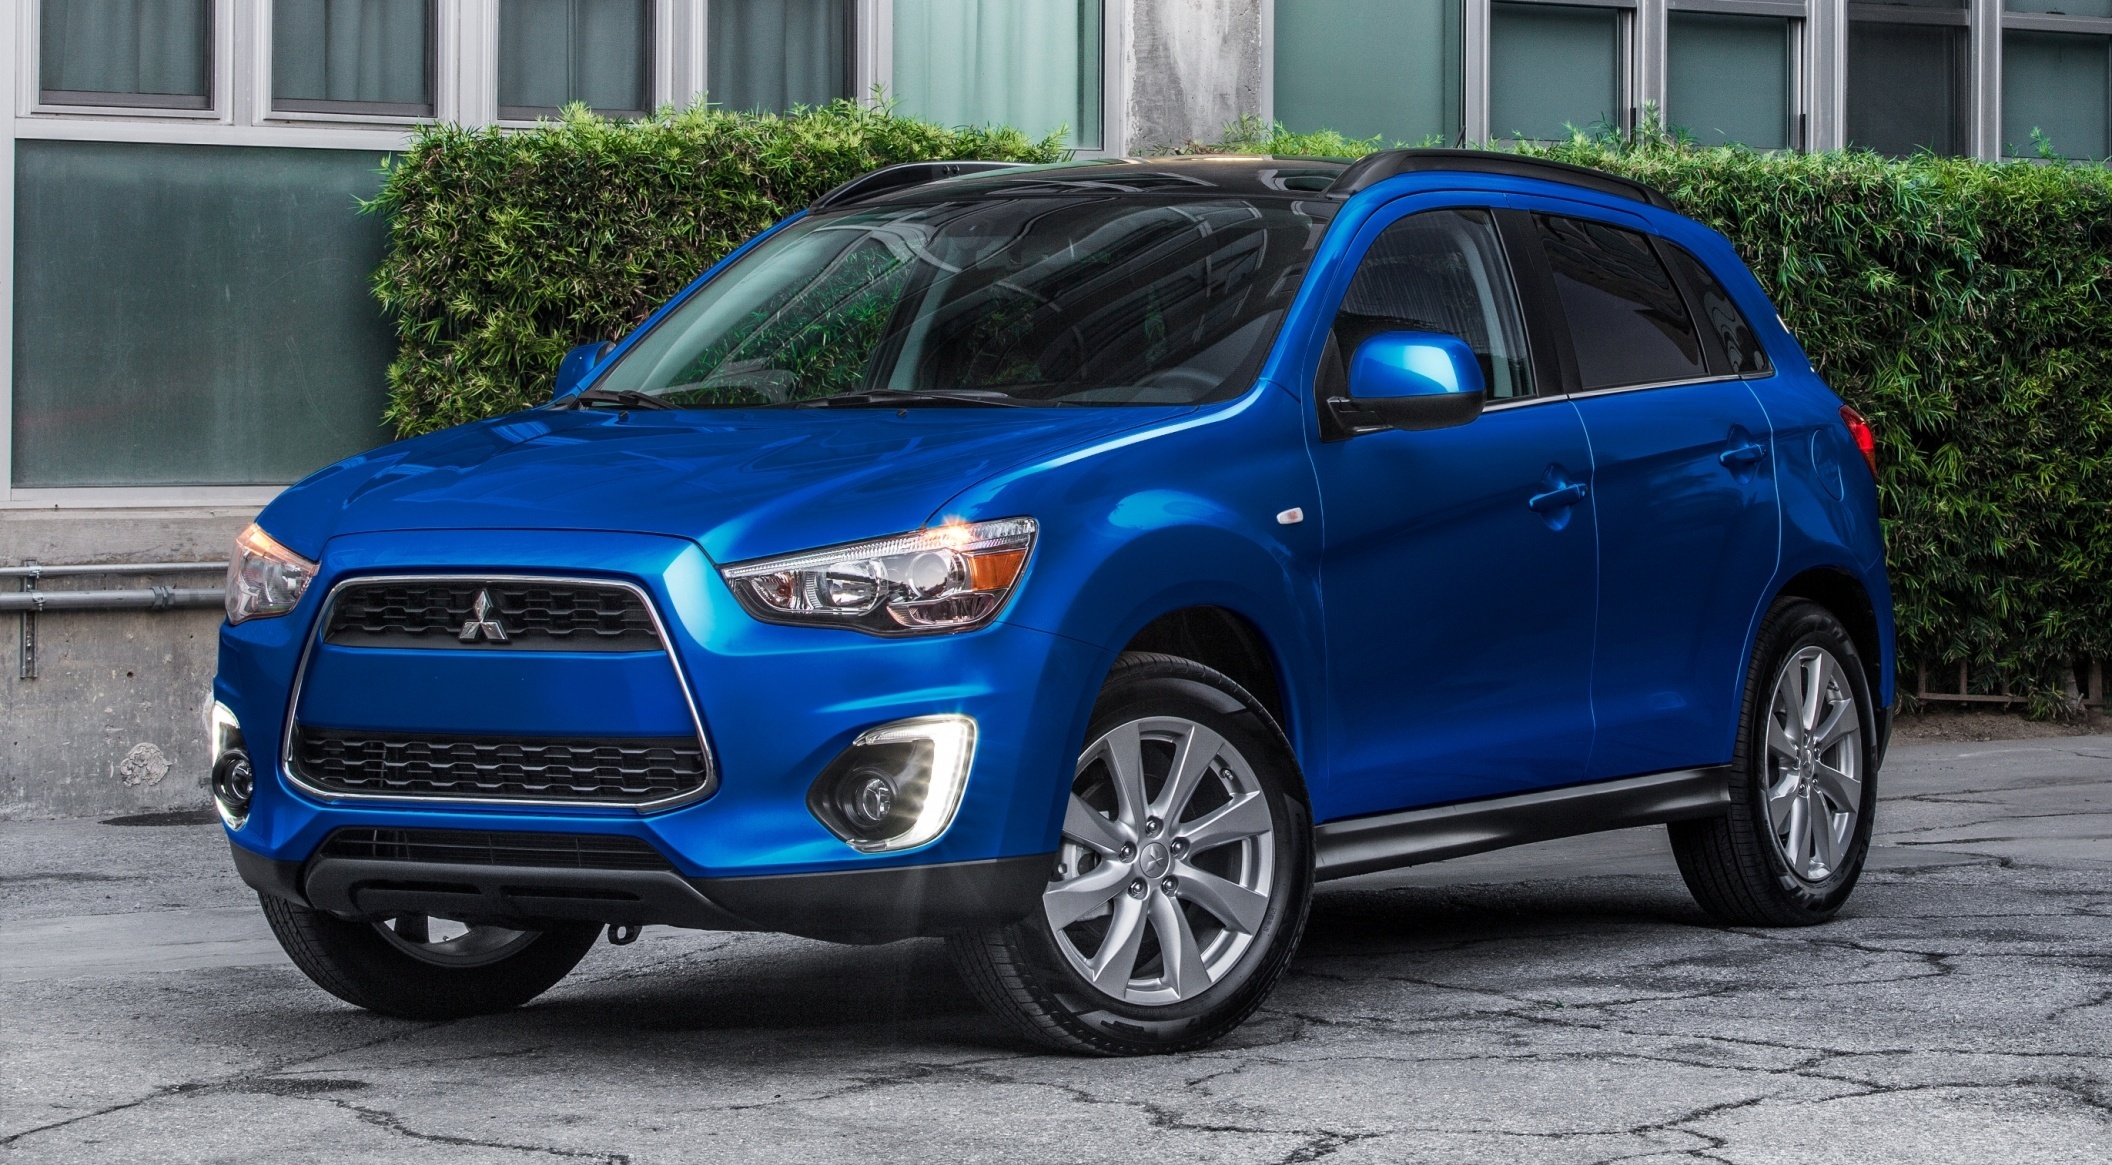 2015 Mitsubishi Outlander Sport Revamped with Cool LED